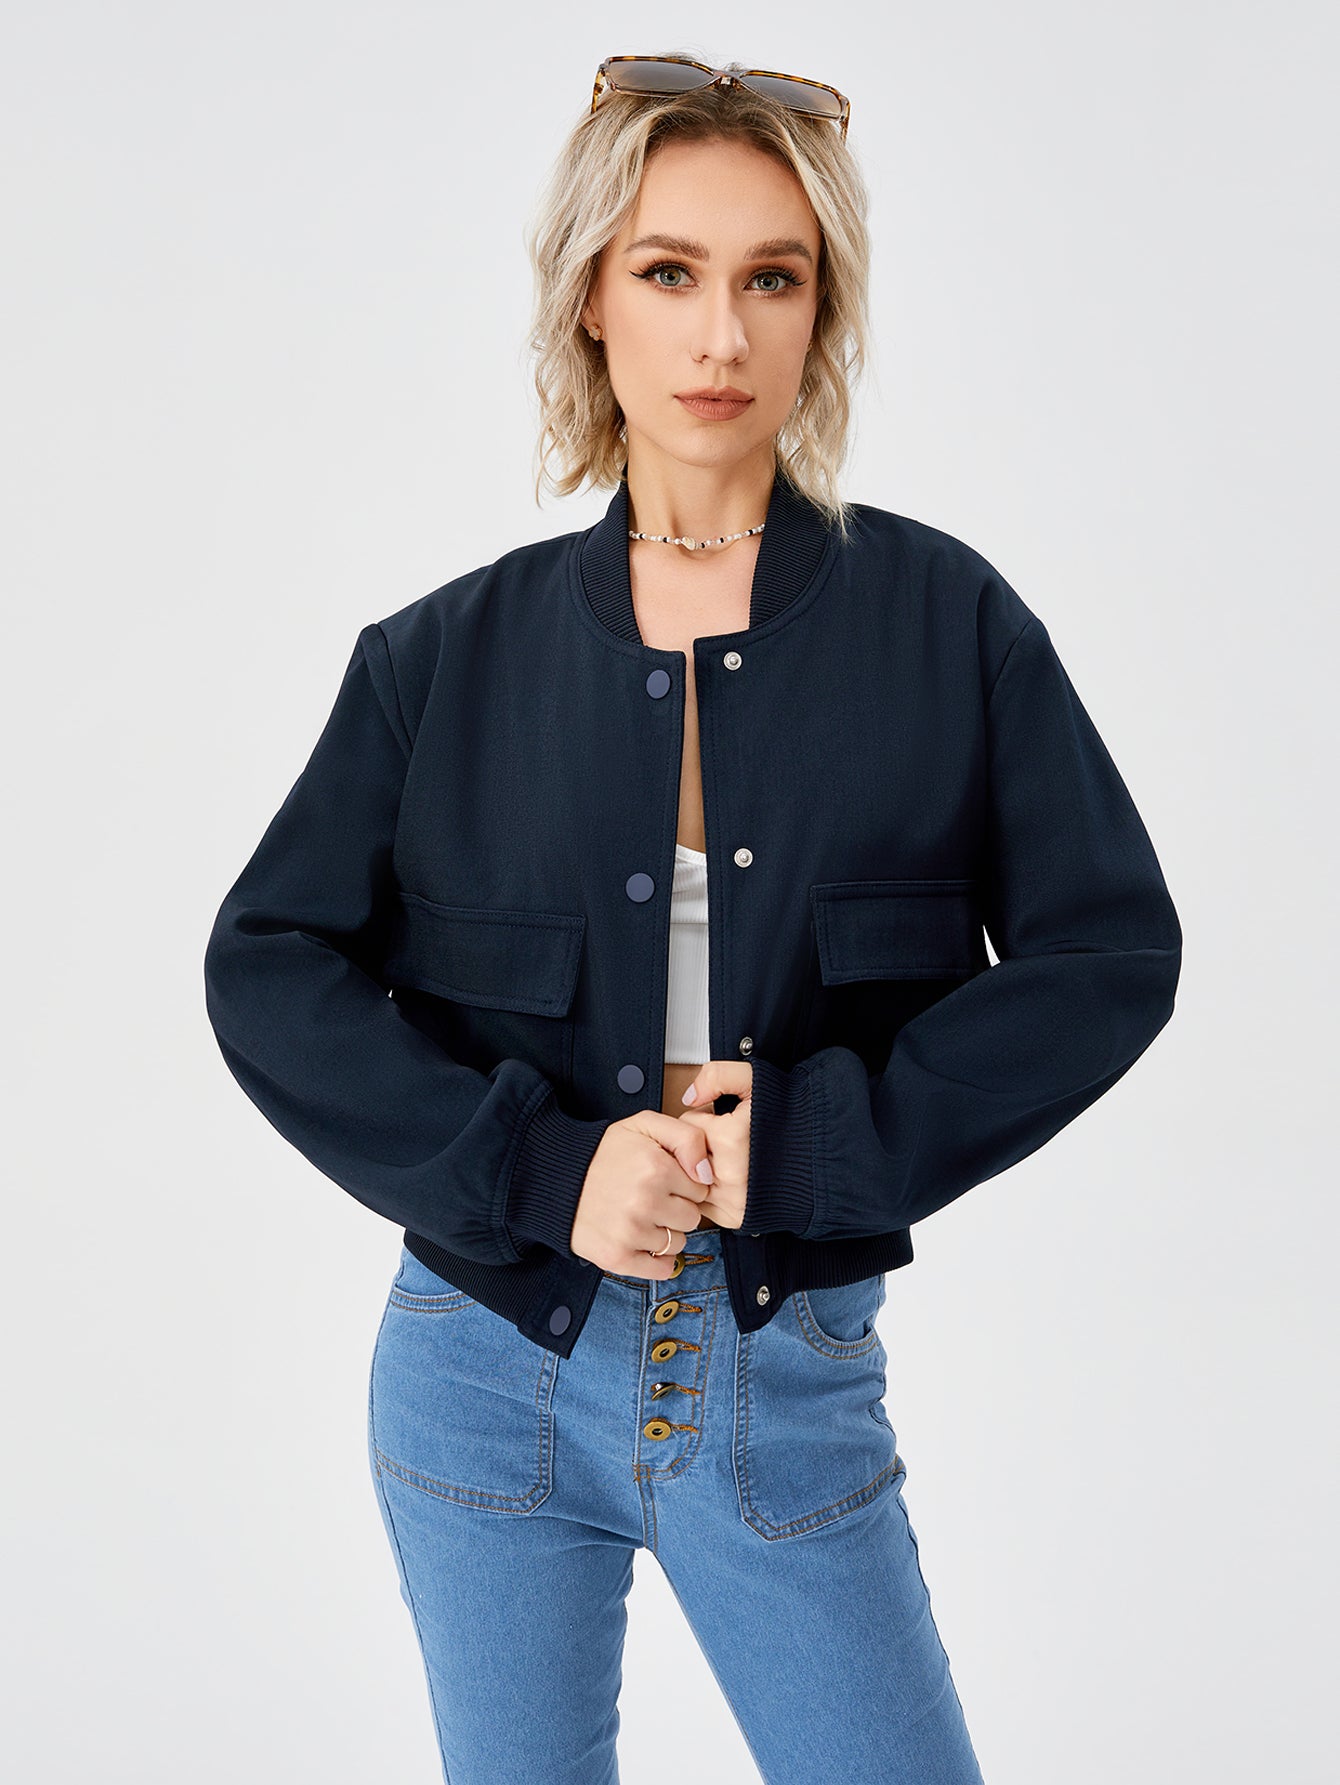 Streetwise Chic: Women's Lightweight Cropped Bomber Jacket